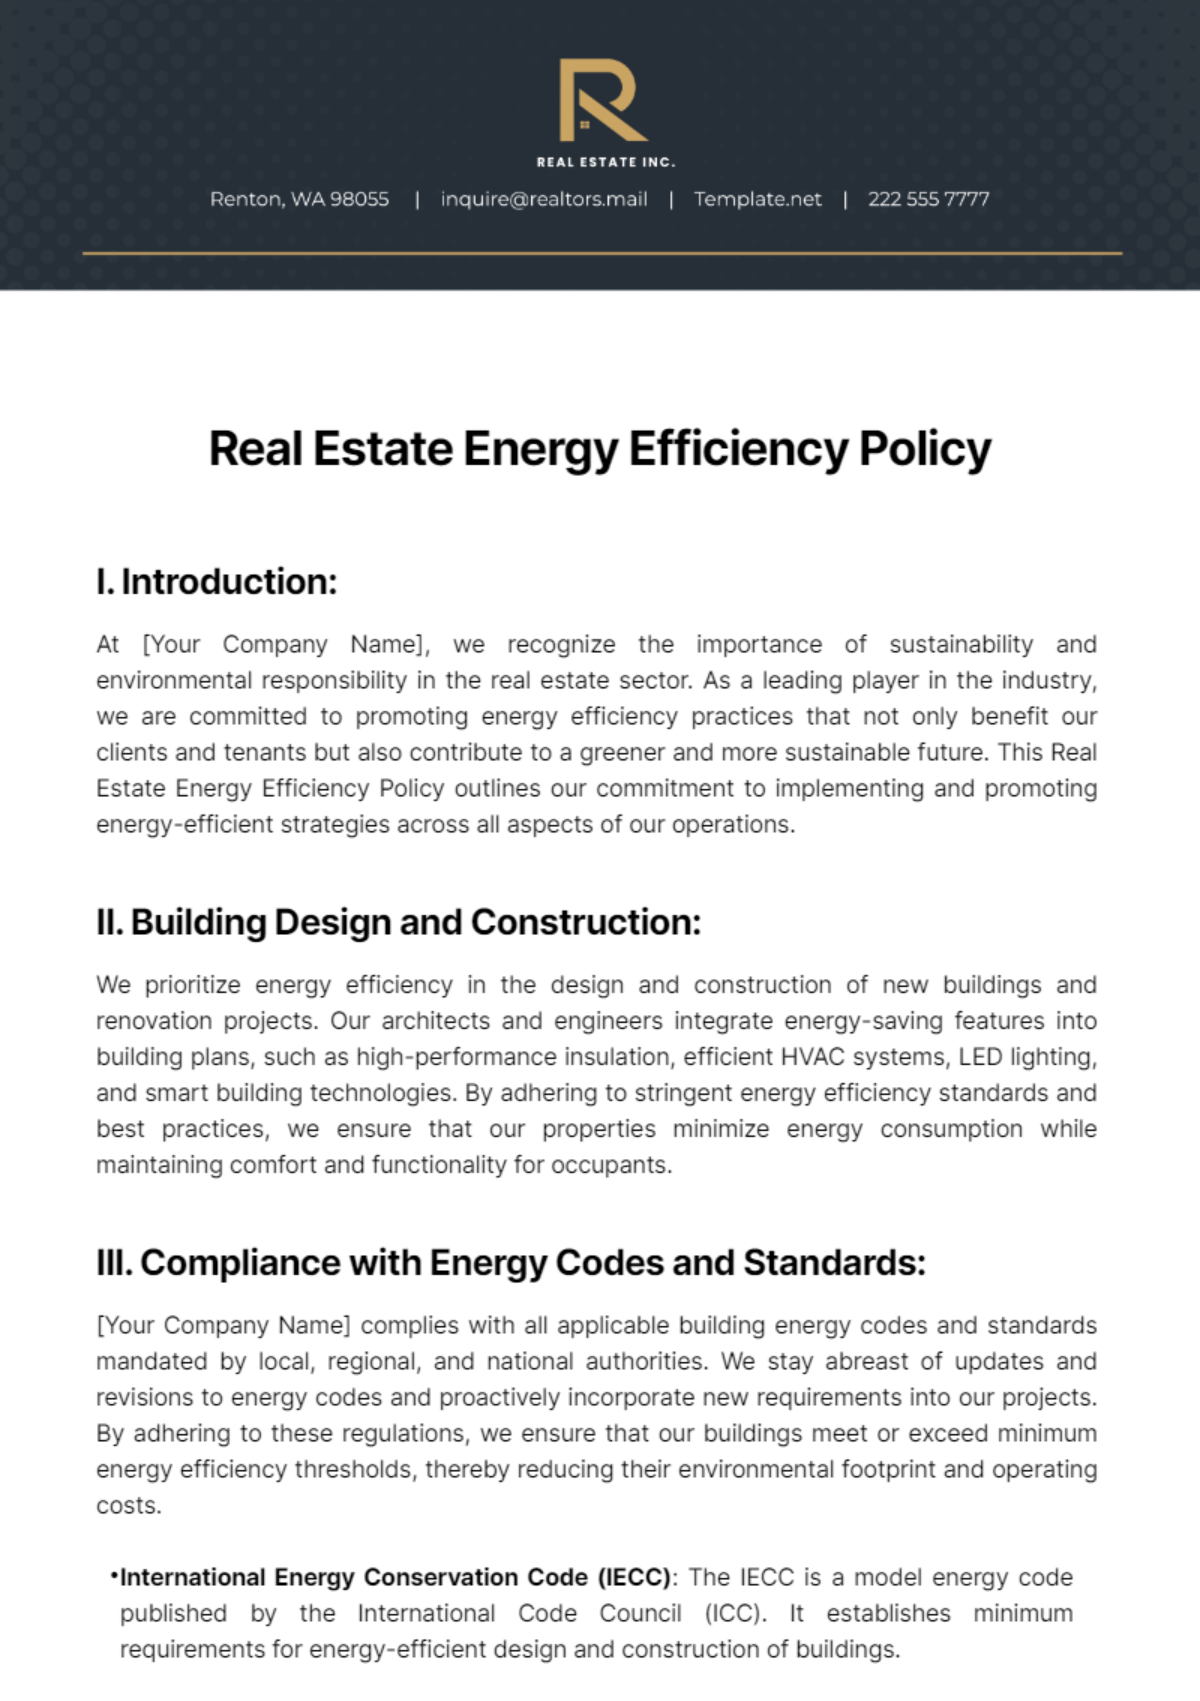 Real Estate Energy Efficiency Policy Template